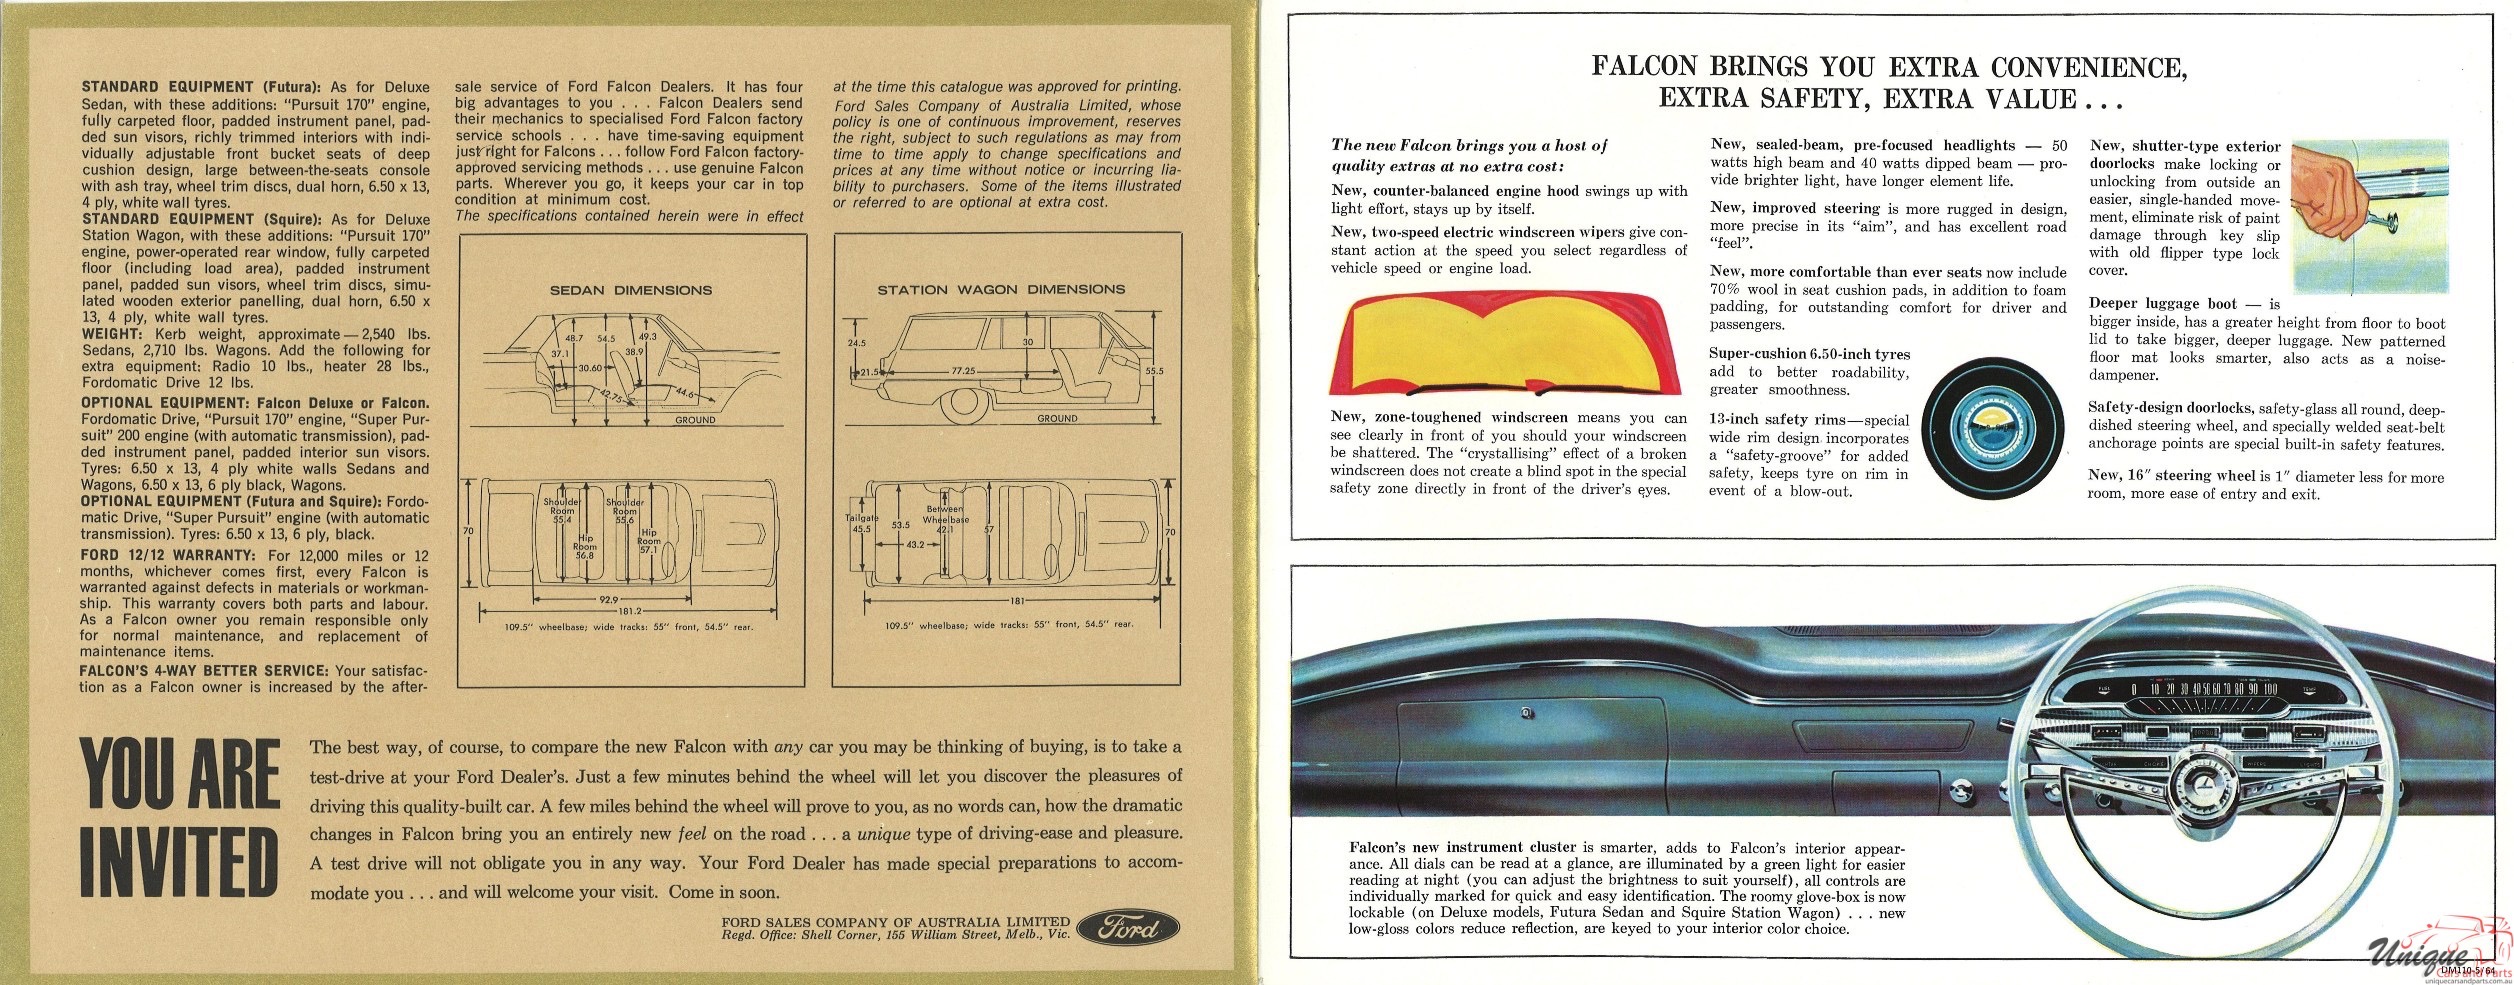 1964 Ford XM Falcon DeLuxe Brochure Page 1